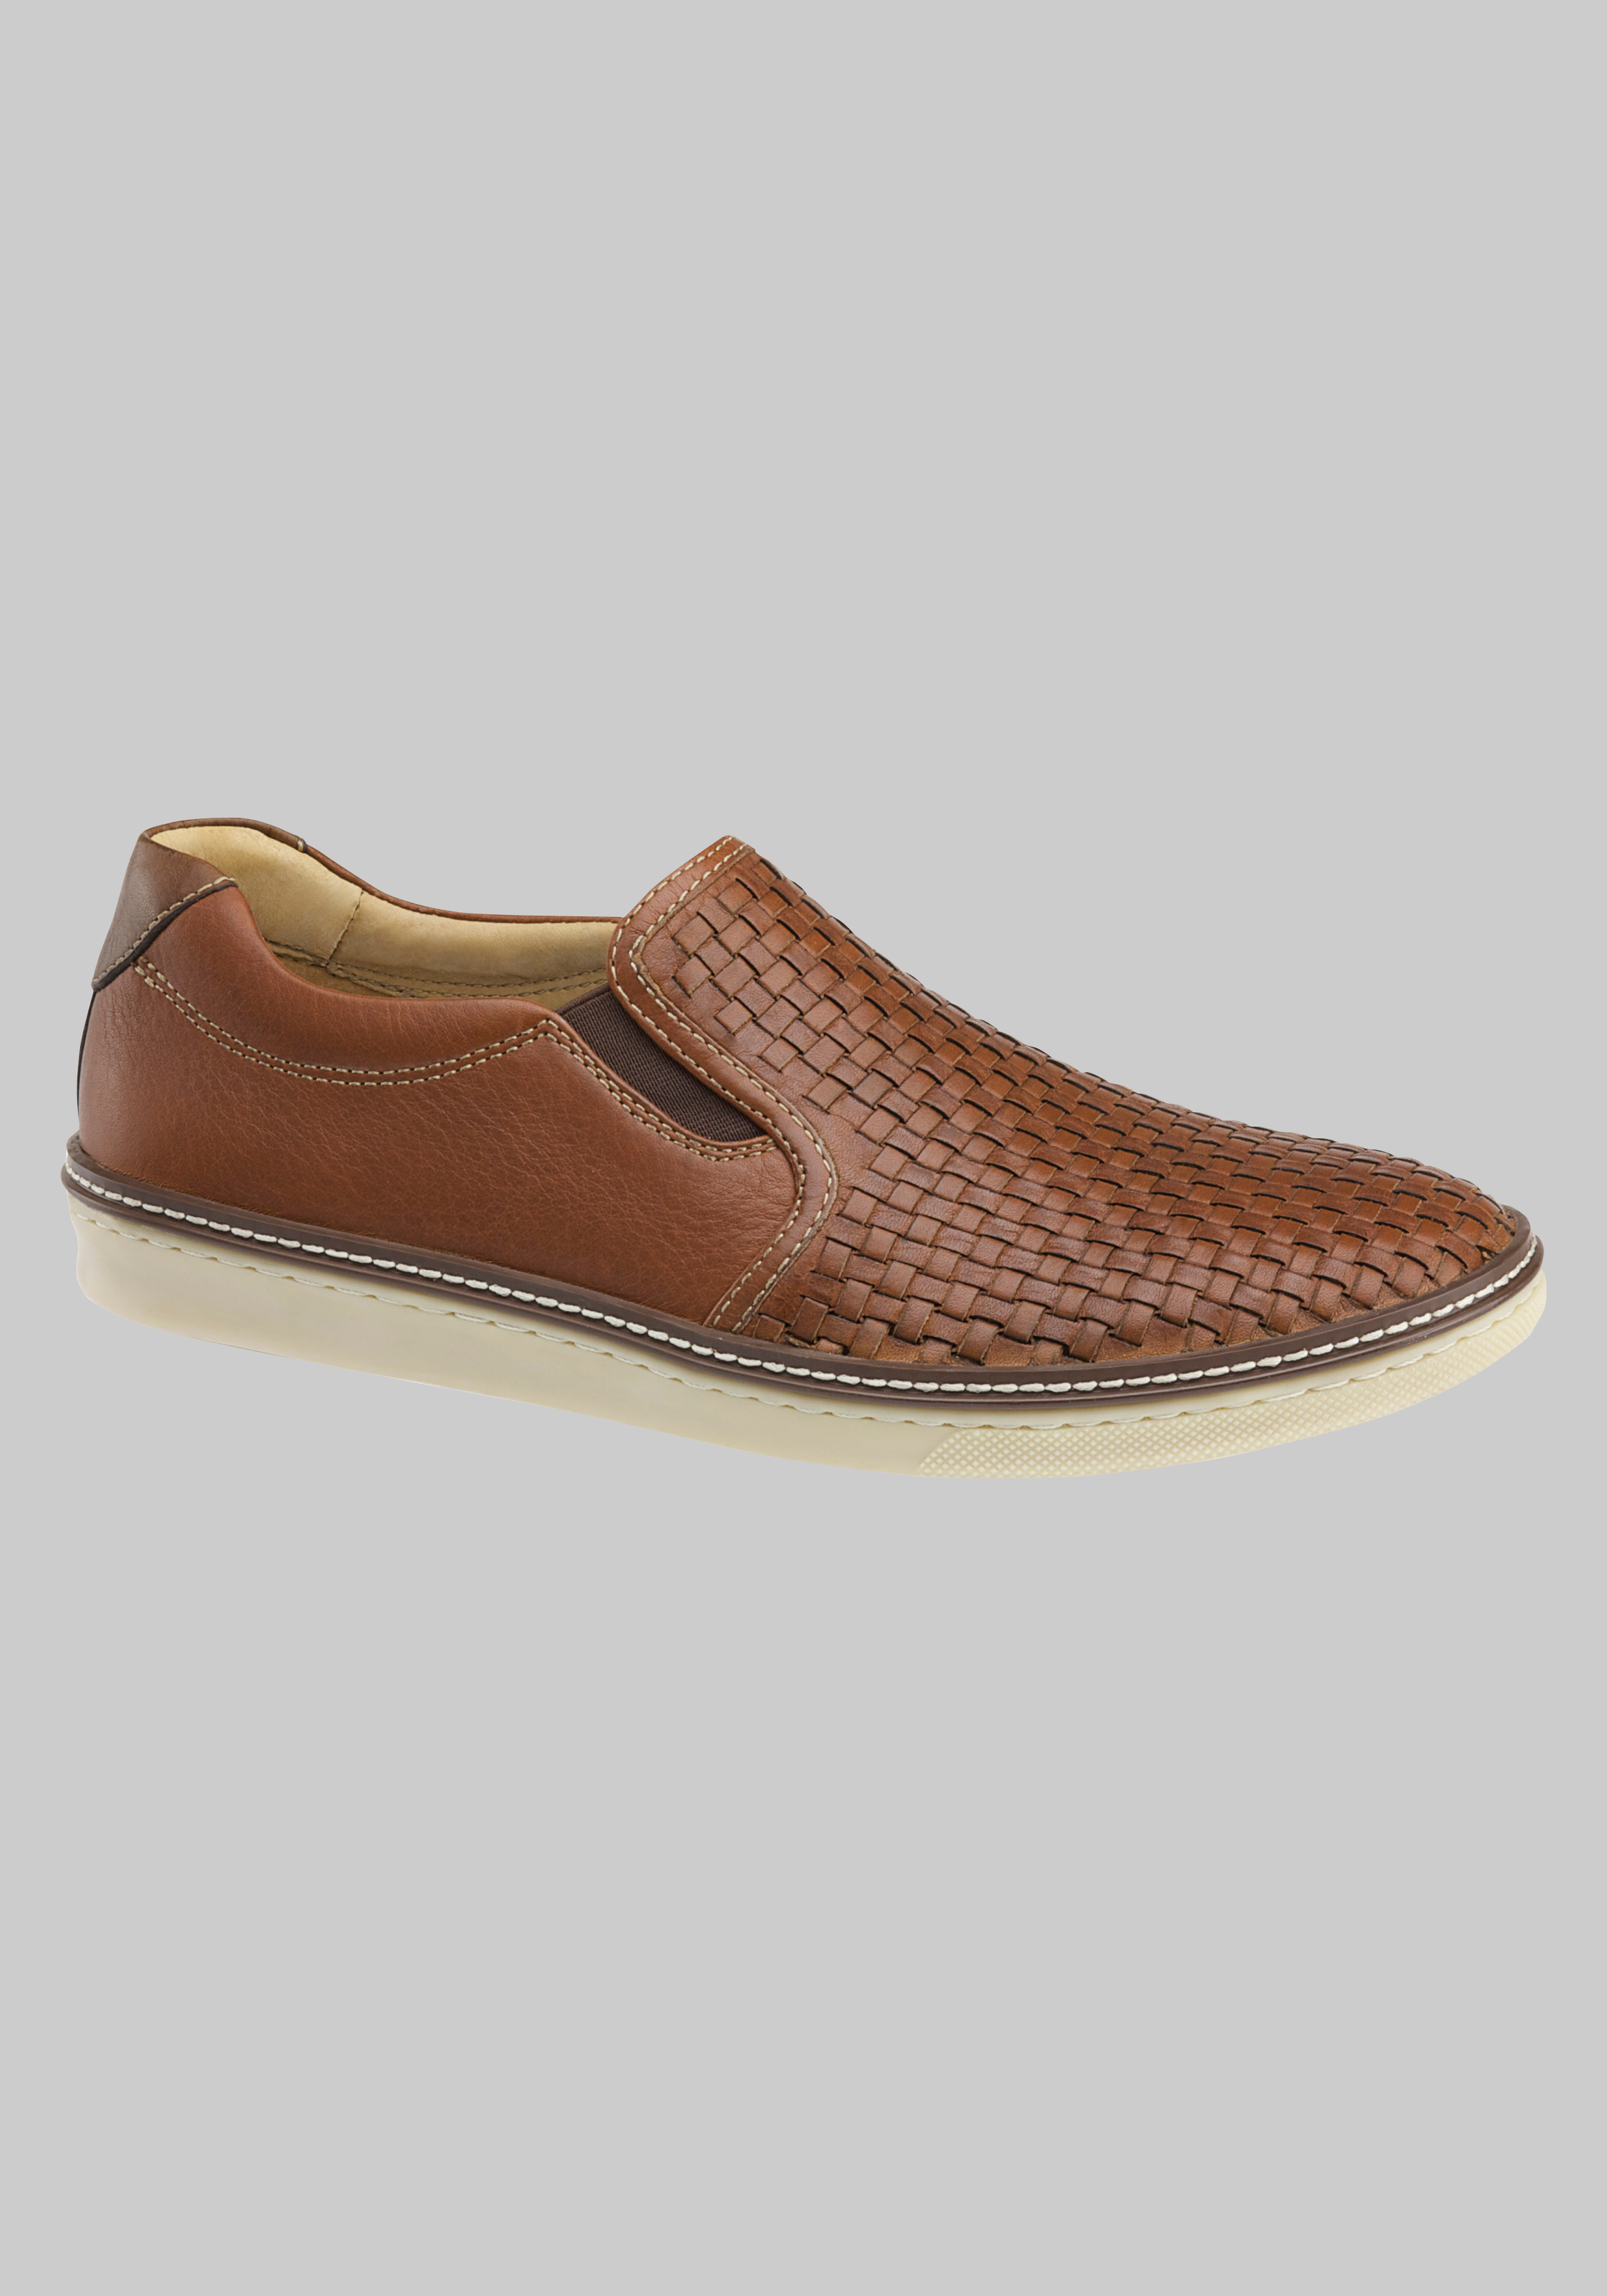 Men's Casual Shoes | Loafers, Slip Ons & Moccasins | JoS. A. Bank